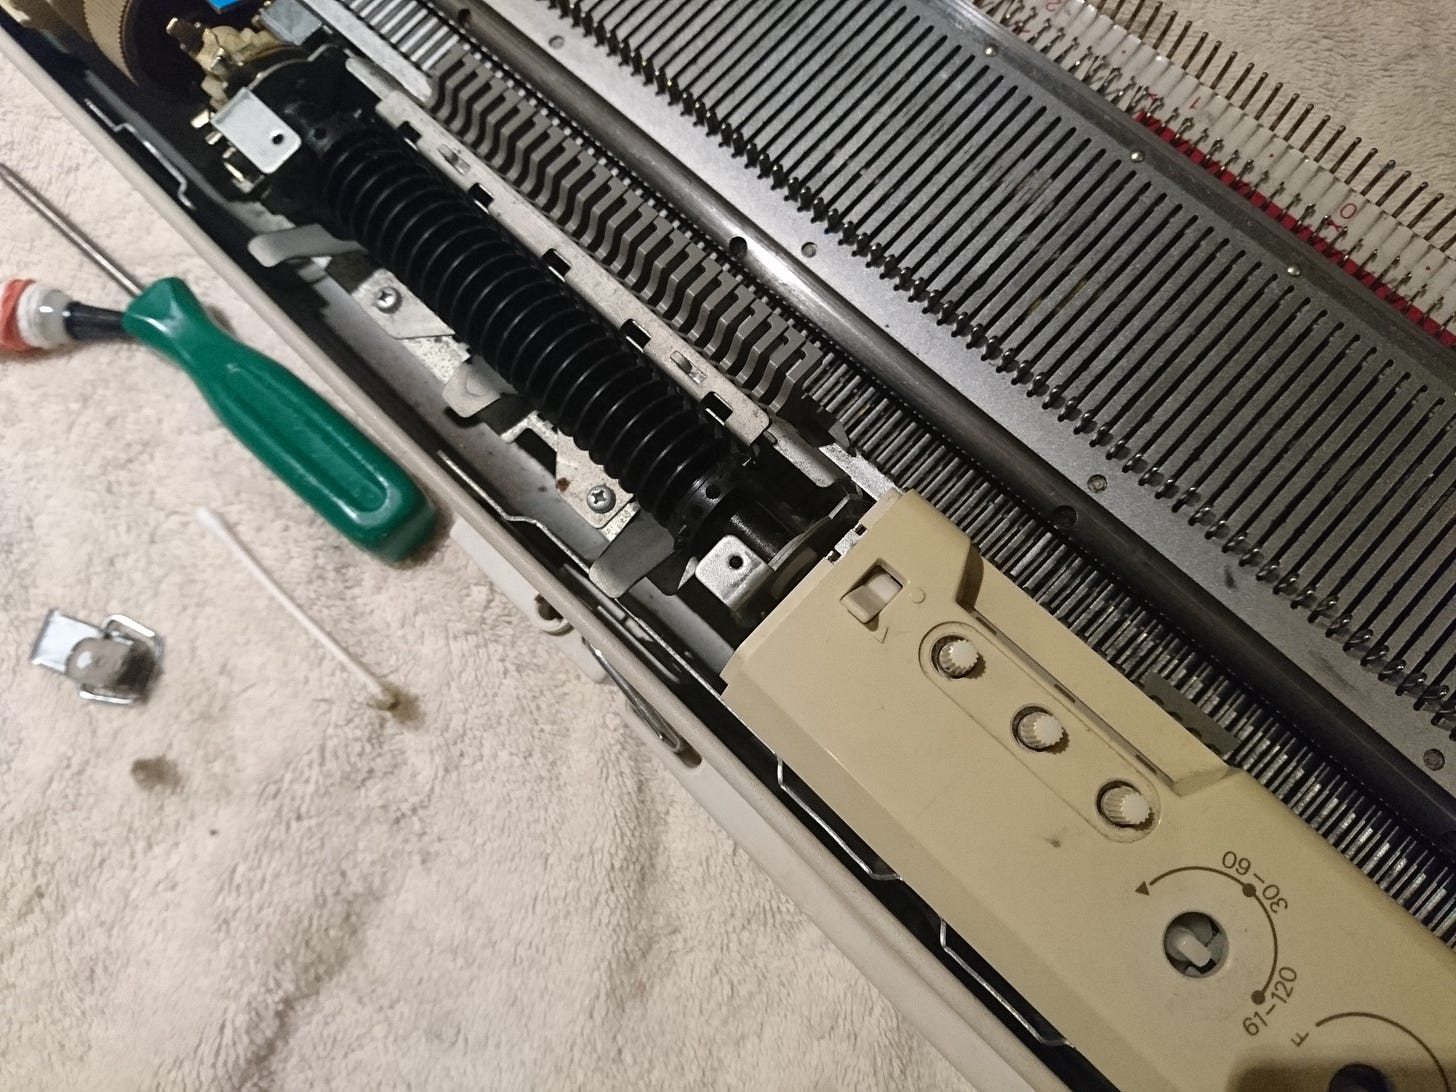 knitting machine with the punch card reader cover removed on a beige towel with a green handled screwdriver nearby